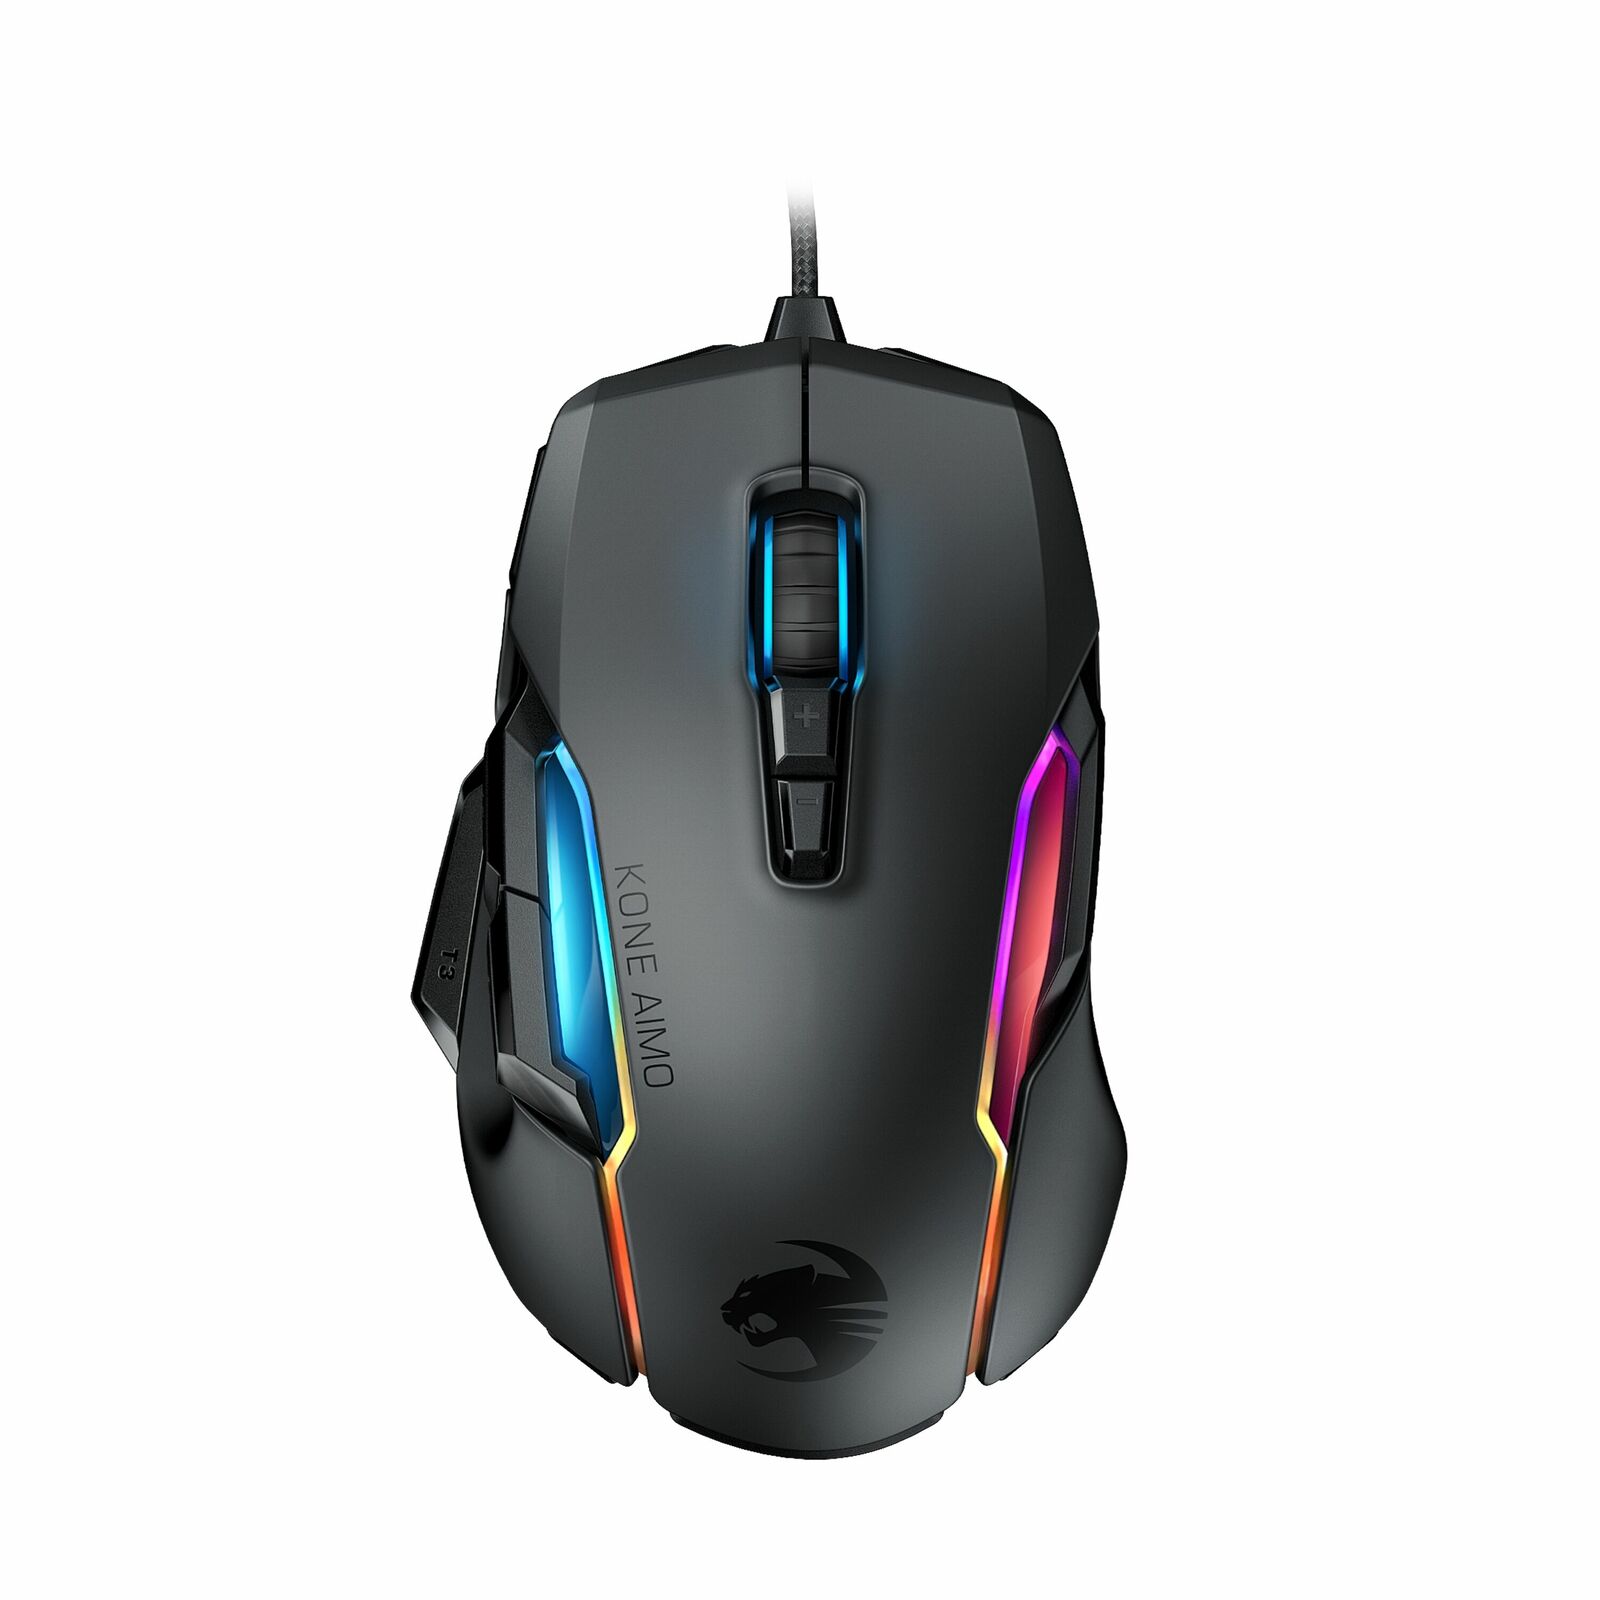 ROCCAT ROC-11-820-BK Kone AIMO Remastered RGBA Smart Customization Gaming Mouse - Black - image 1 of 6